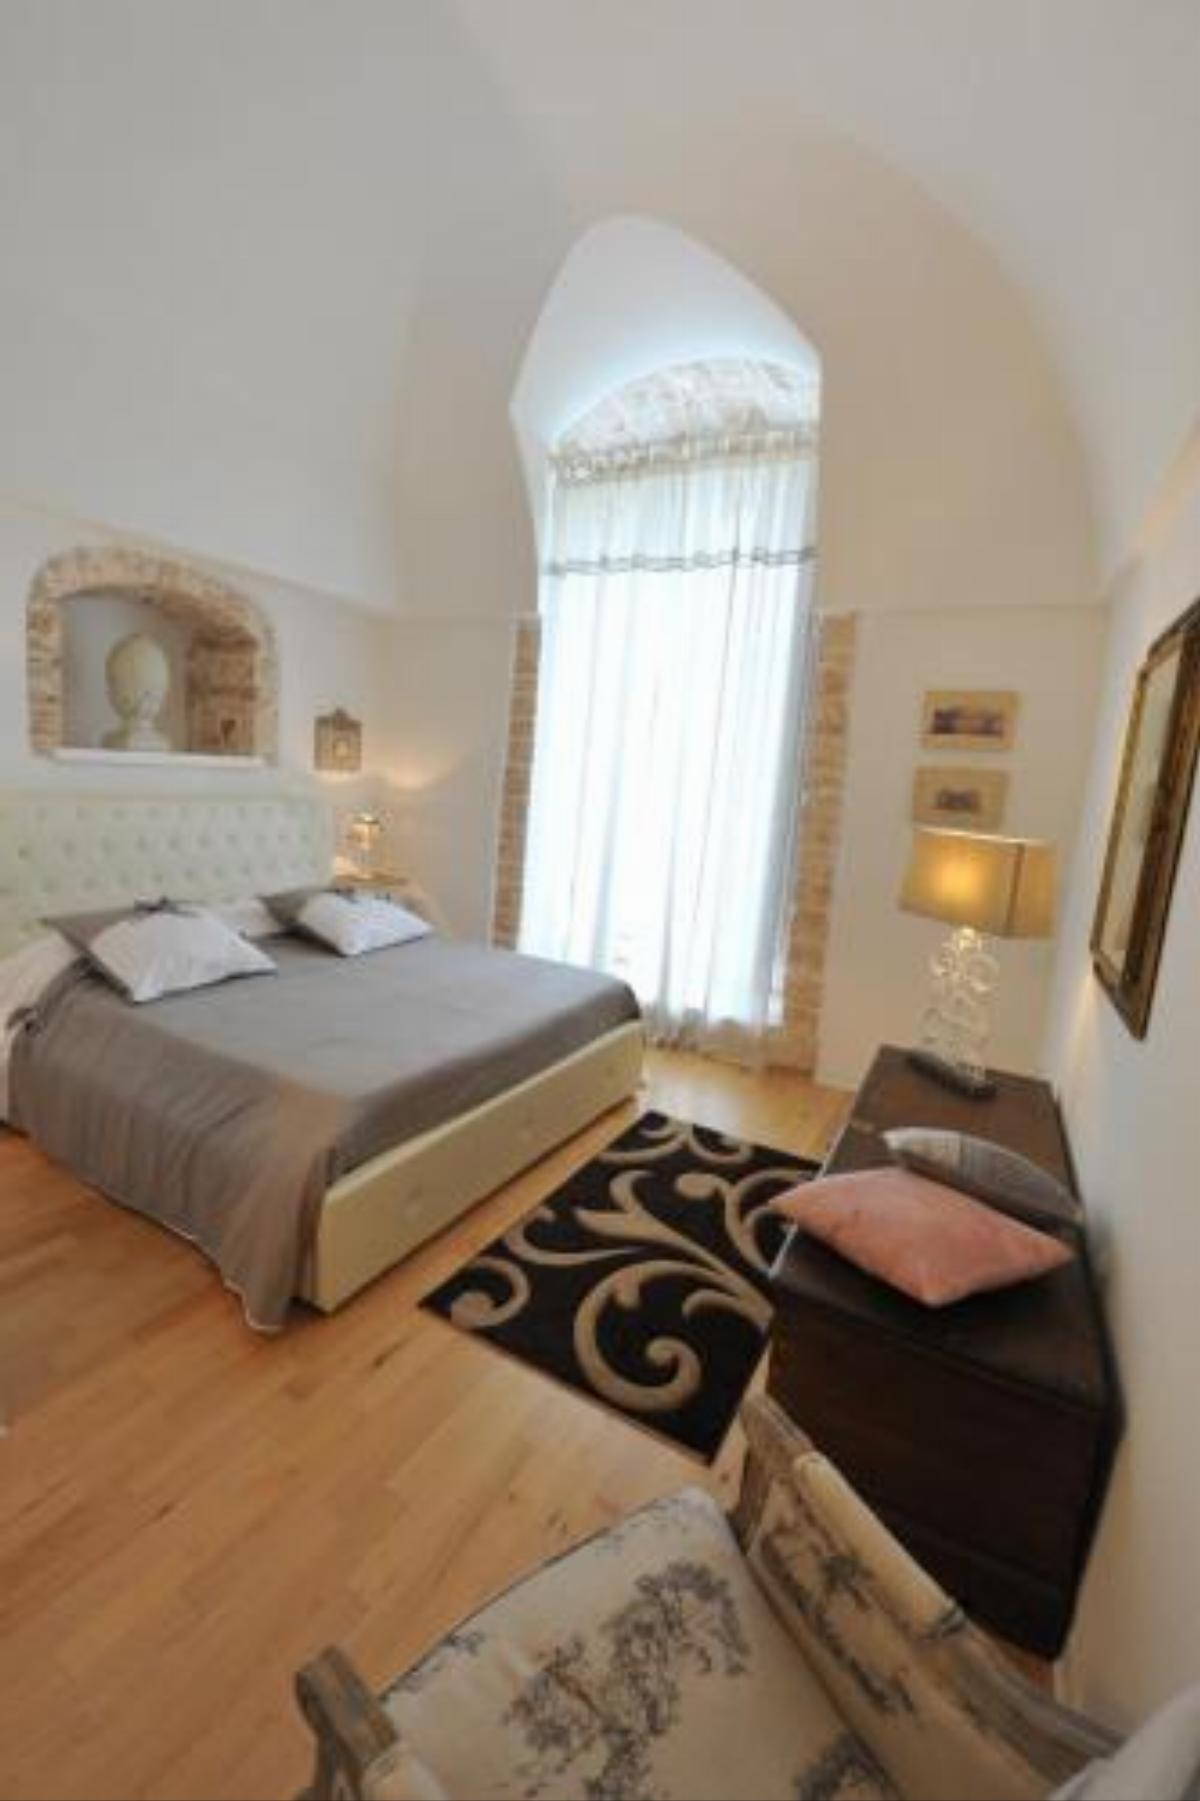 B&B Grotte in Suite Hotel Castellana Grotte Italy